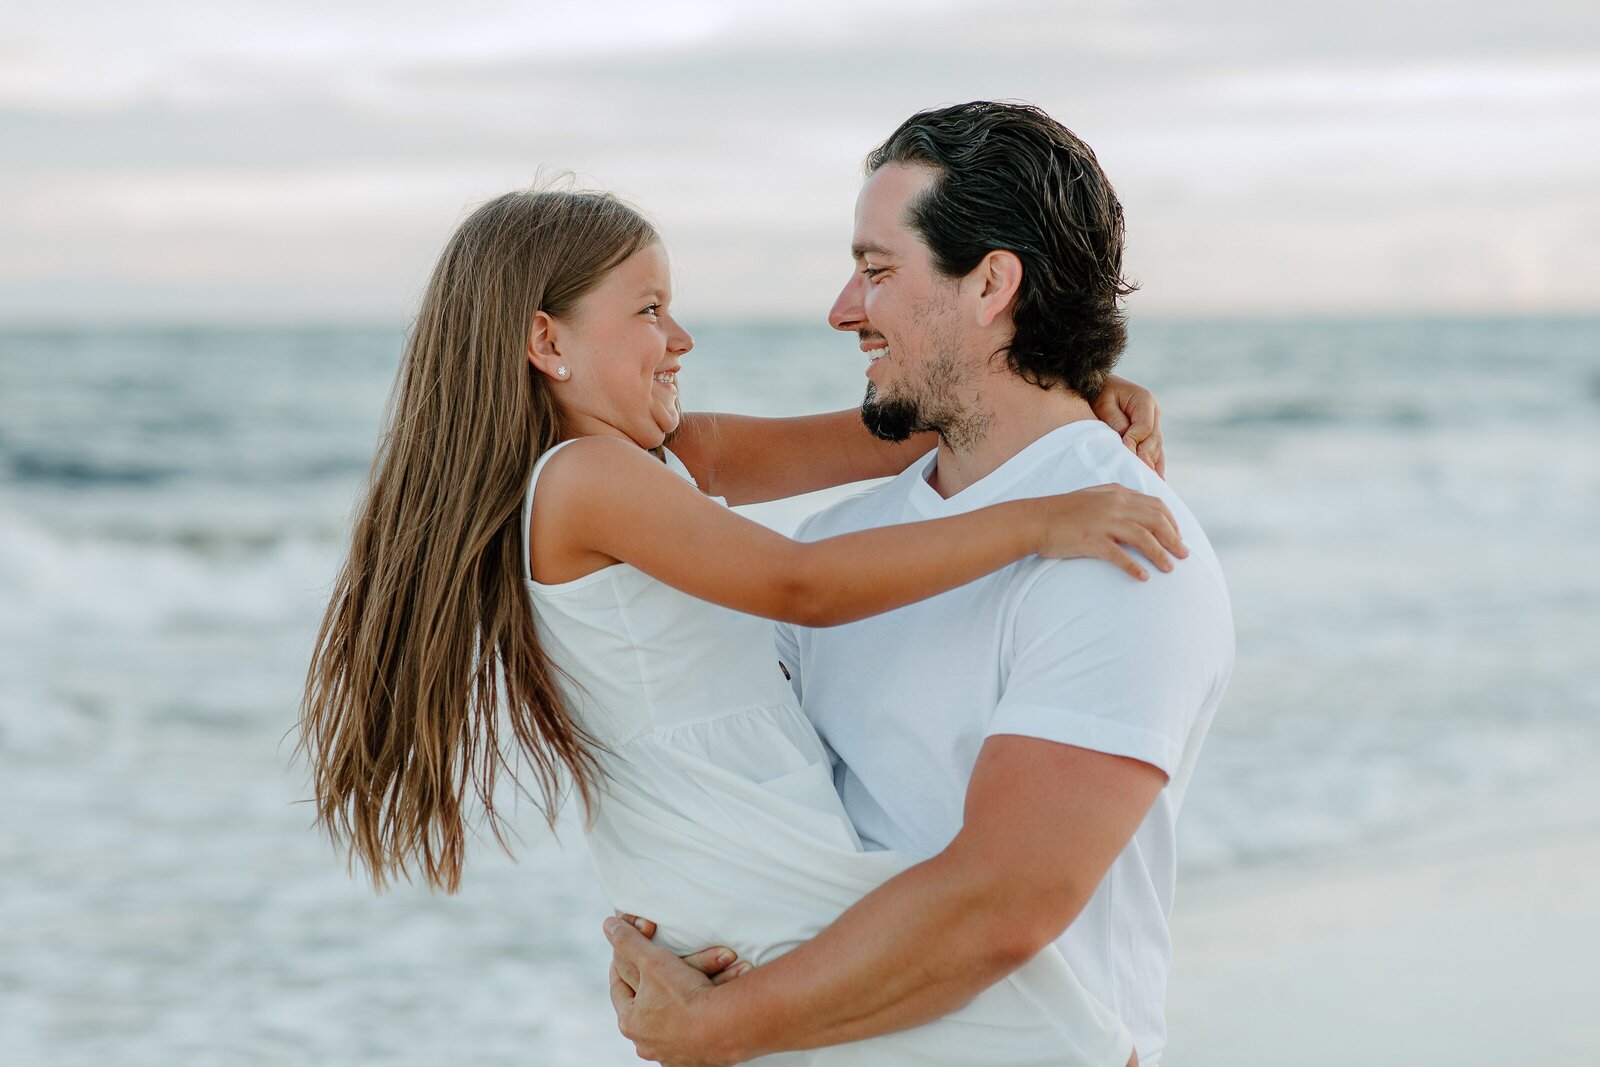 Pensacola Beach vacation family photography session .  Father and daughter playing on the beach.